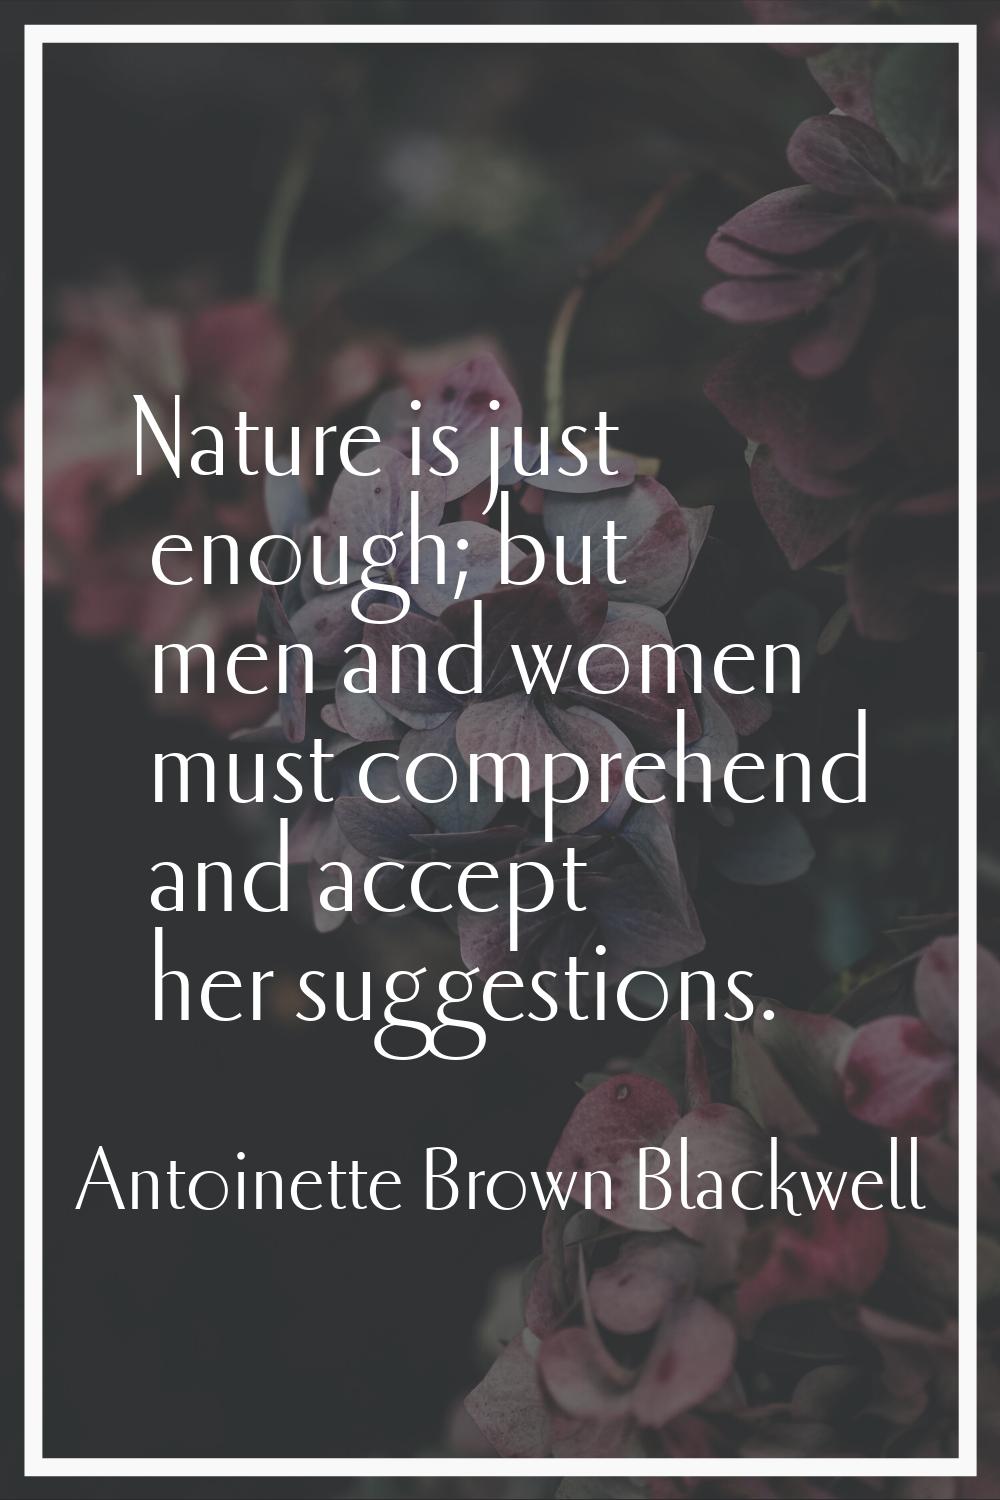 Nature is just enough; but men and women must comprehend and accept her suggestions.